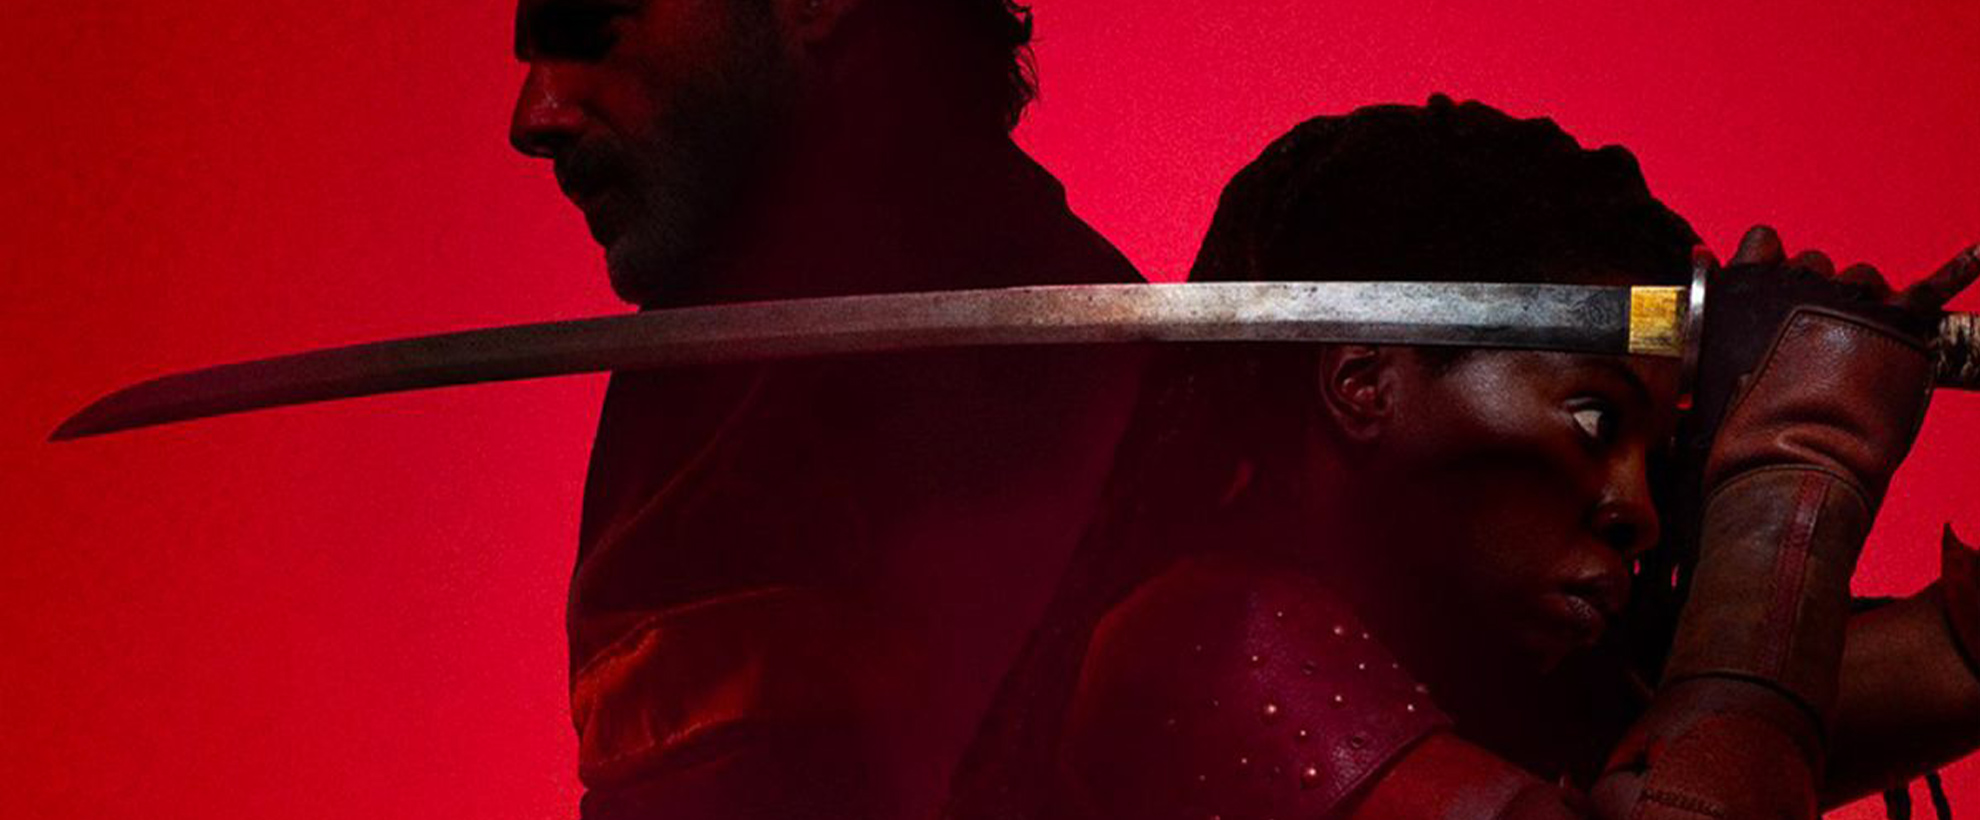 Andrew Lincoln and Danai Gurira stand back to back against a red background, Danai wields a long sword over her shoulder